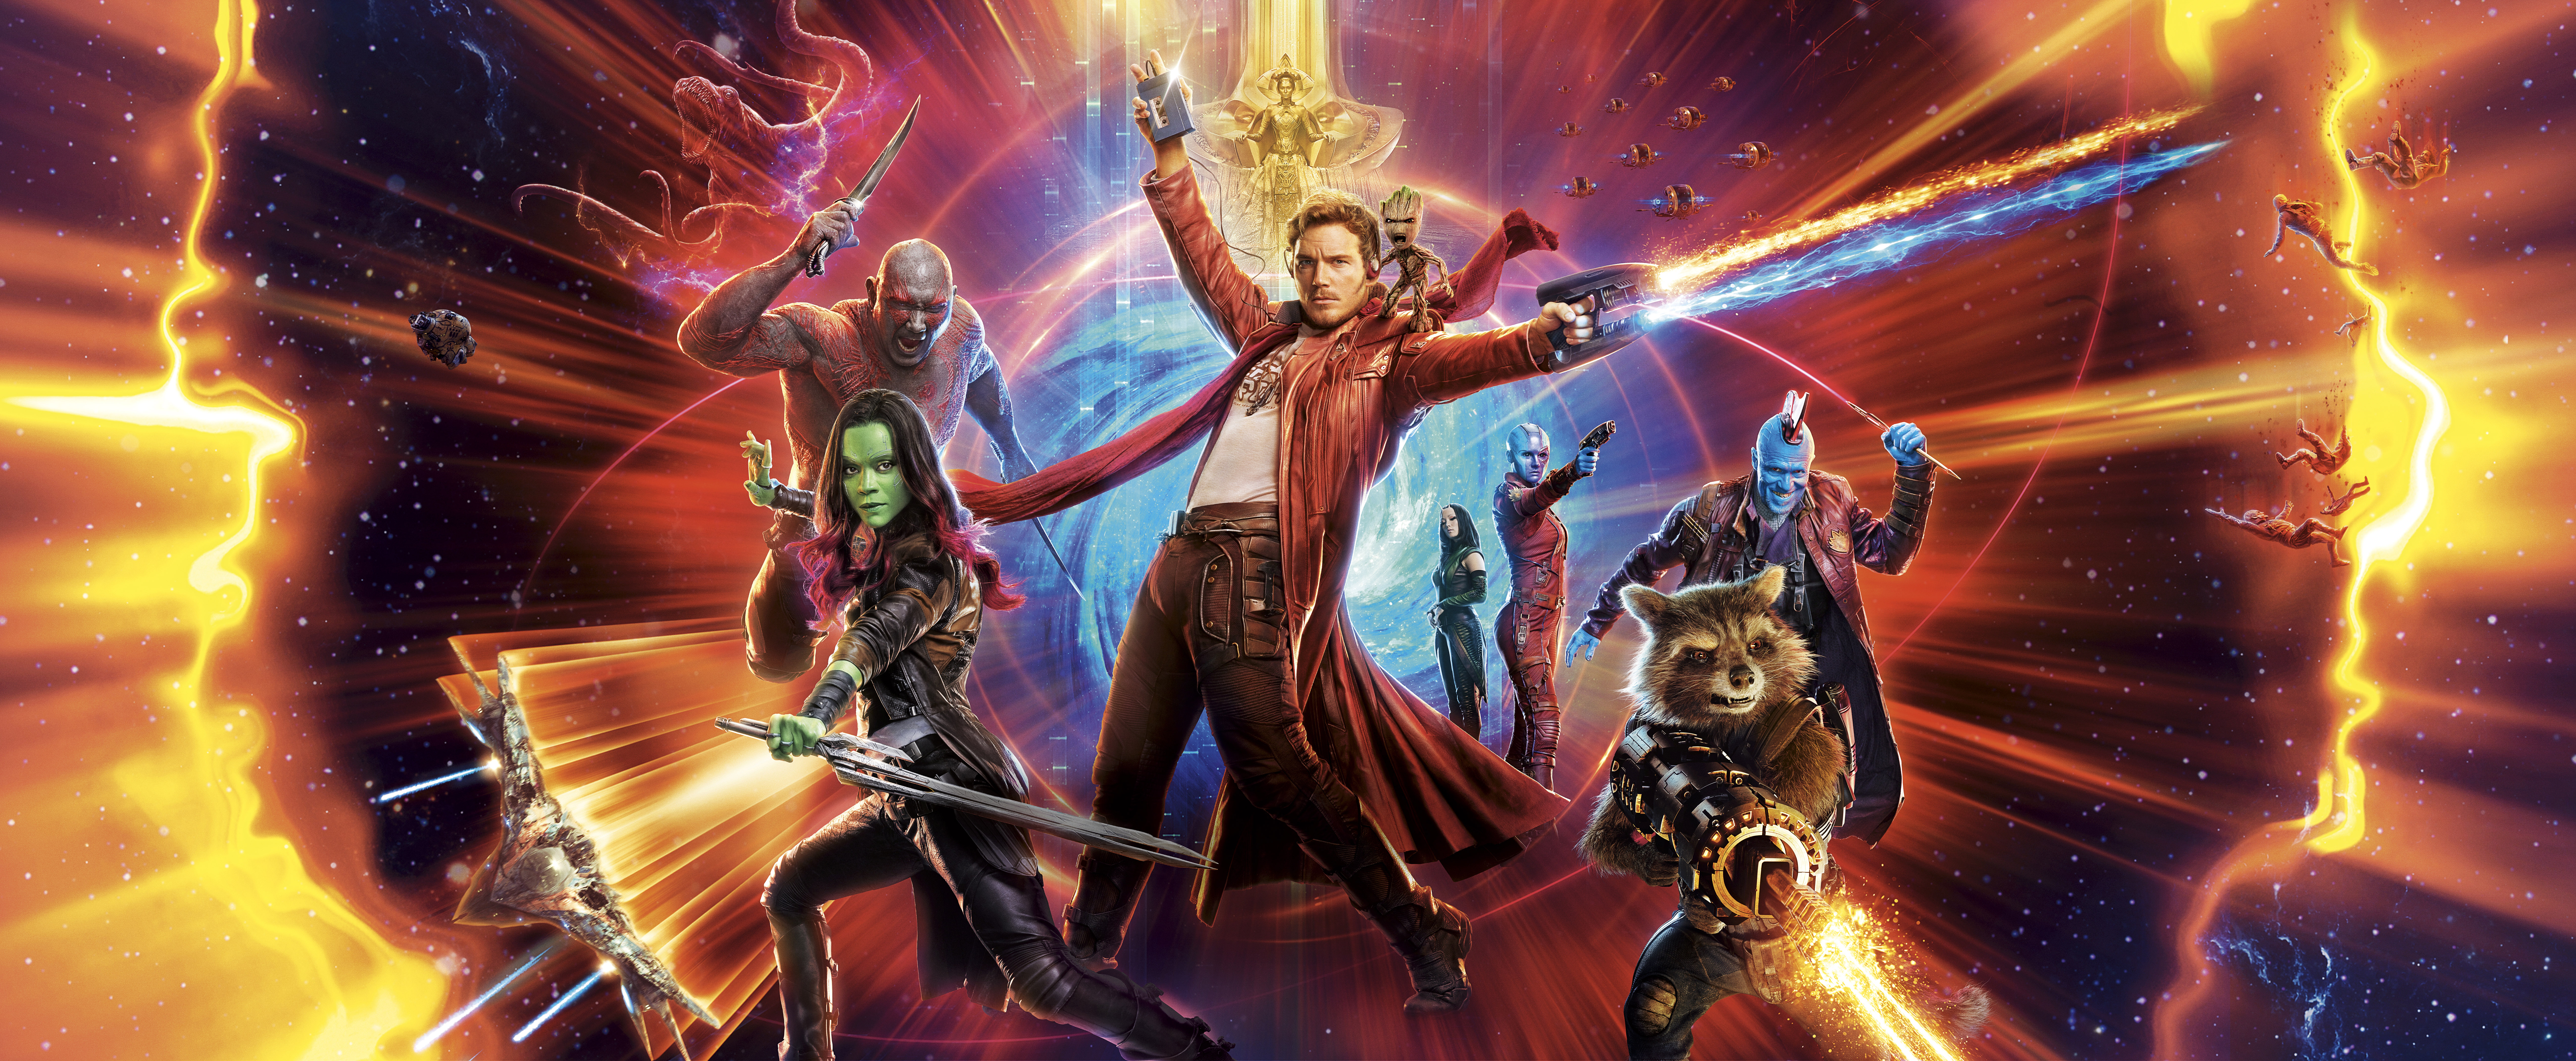 Guardians Of The Galaxy Vol 2 Artwork Wallpapers